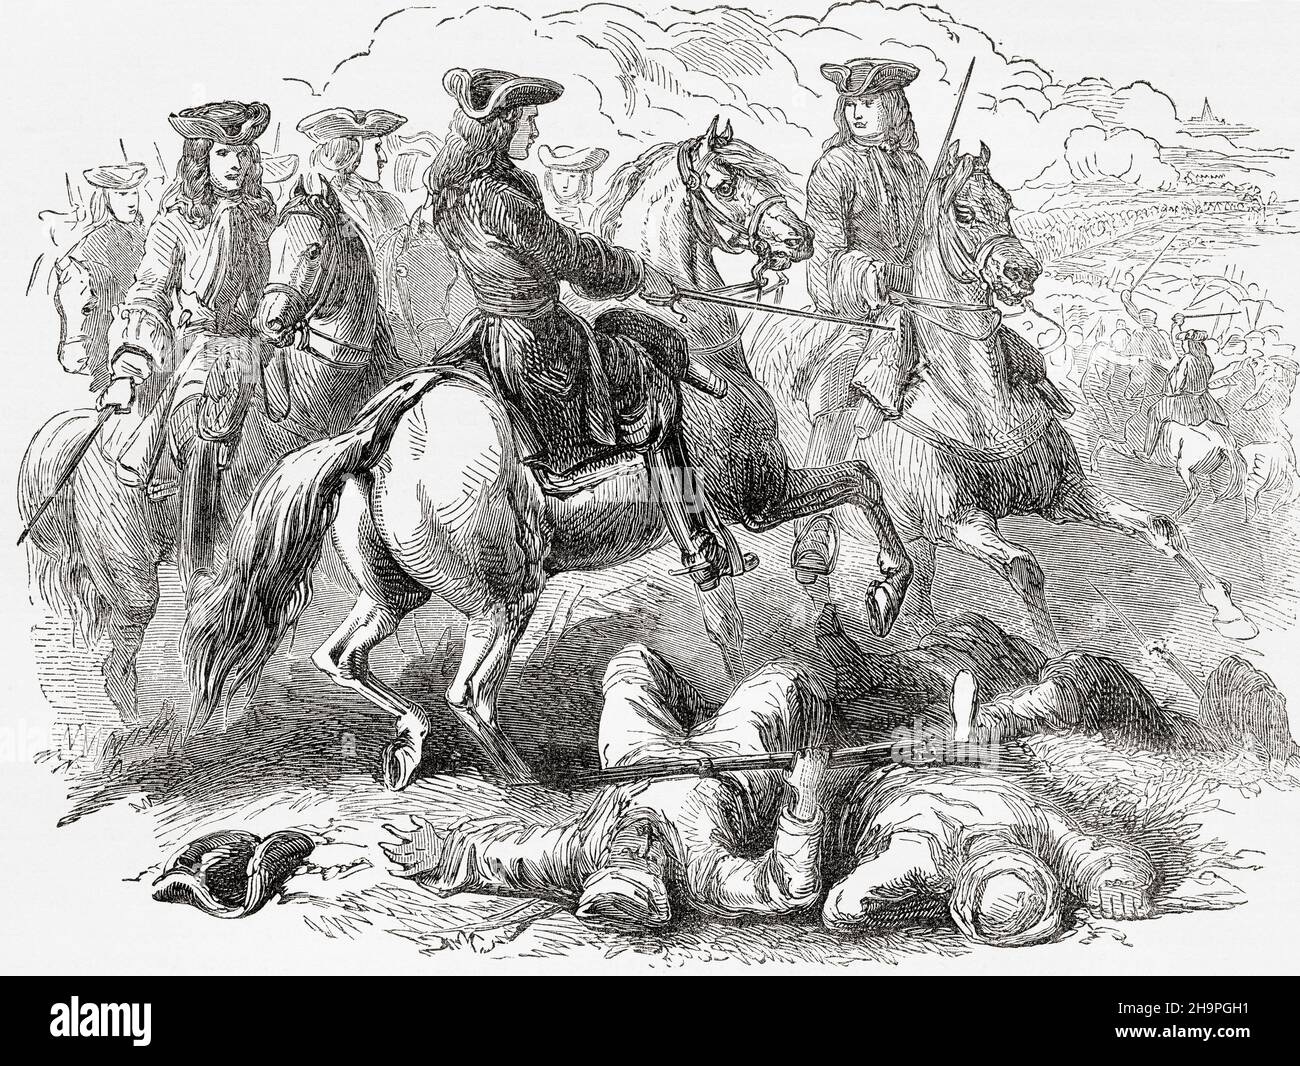 Defeat of the Turks by Prince Eugene at The Battle of Zenta, aka Battle of Senta, September 1697. Prince Eugene Francis of Savoy–Carignano, 1663 – 1736, aka Prince Eugene Field marshal in the army of the Holy Roman Empire and of the Austrian Habsburg dynasty.  From Cassell's Illustrated History of England, published c.1890. Stock Photo